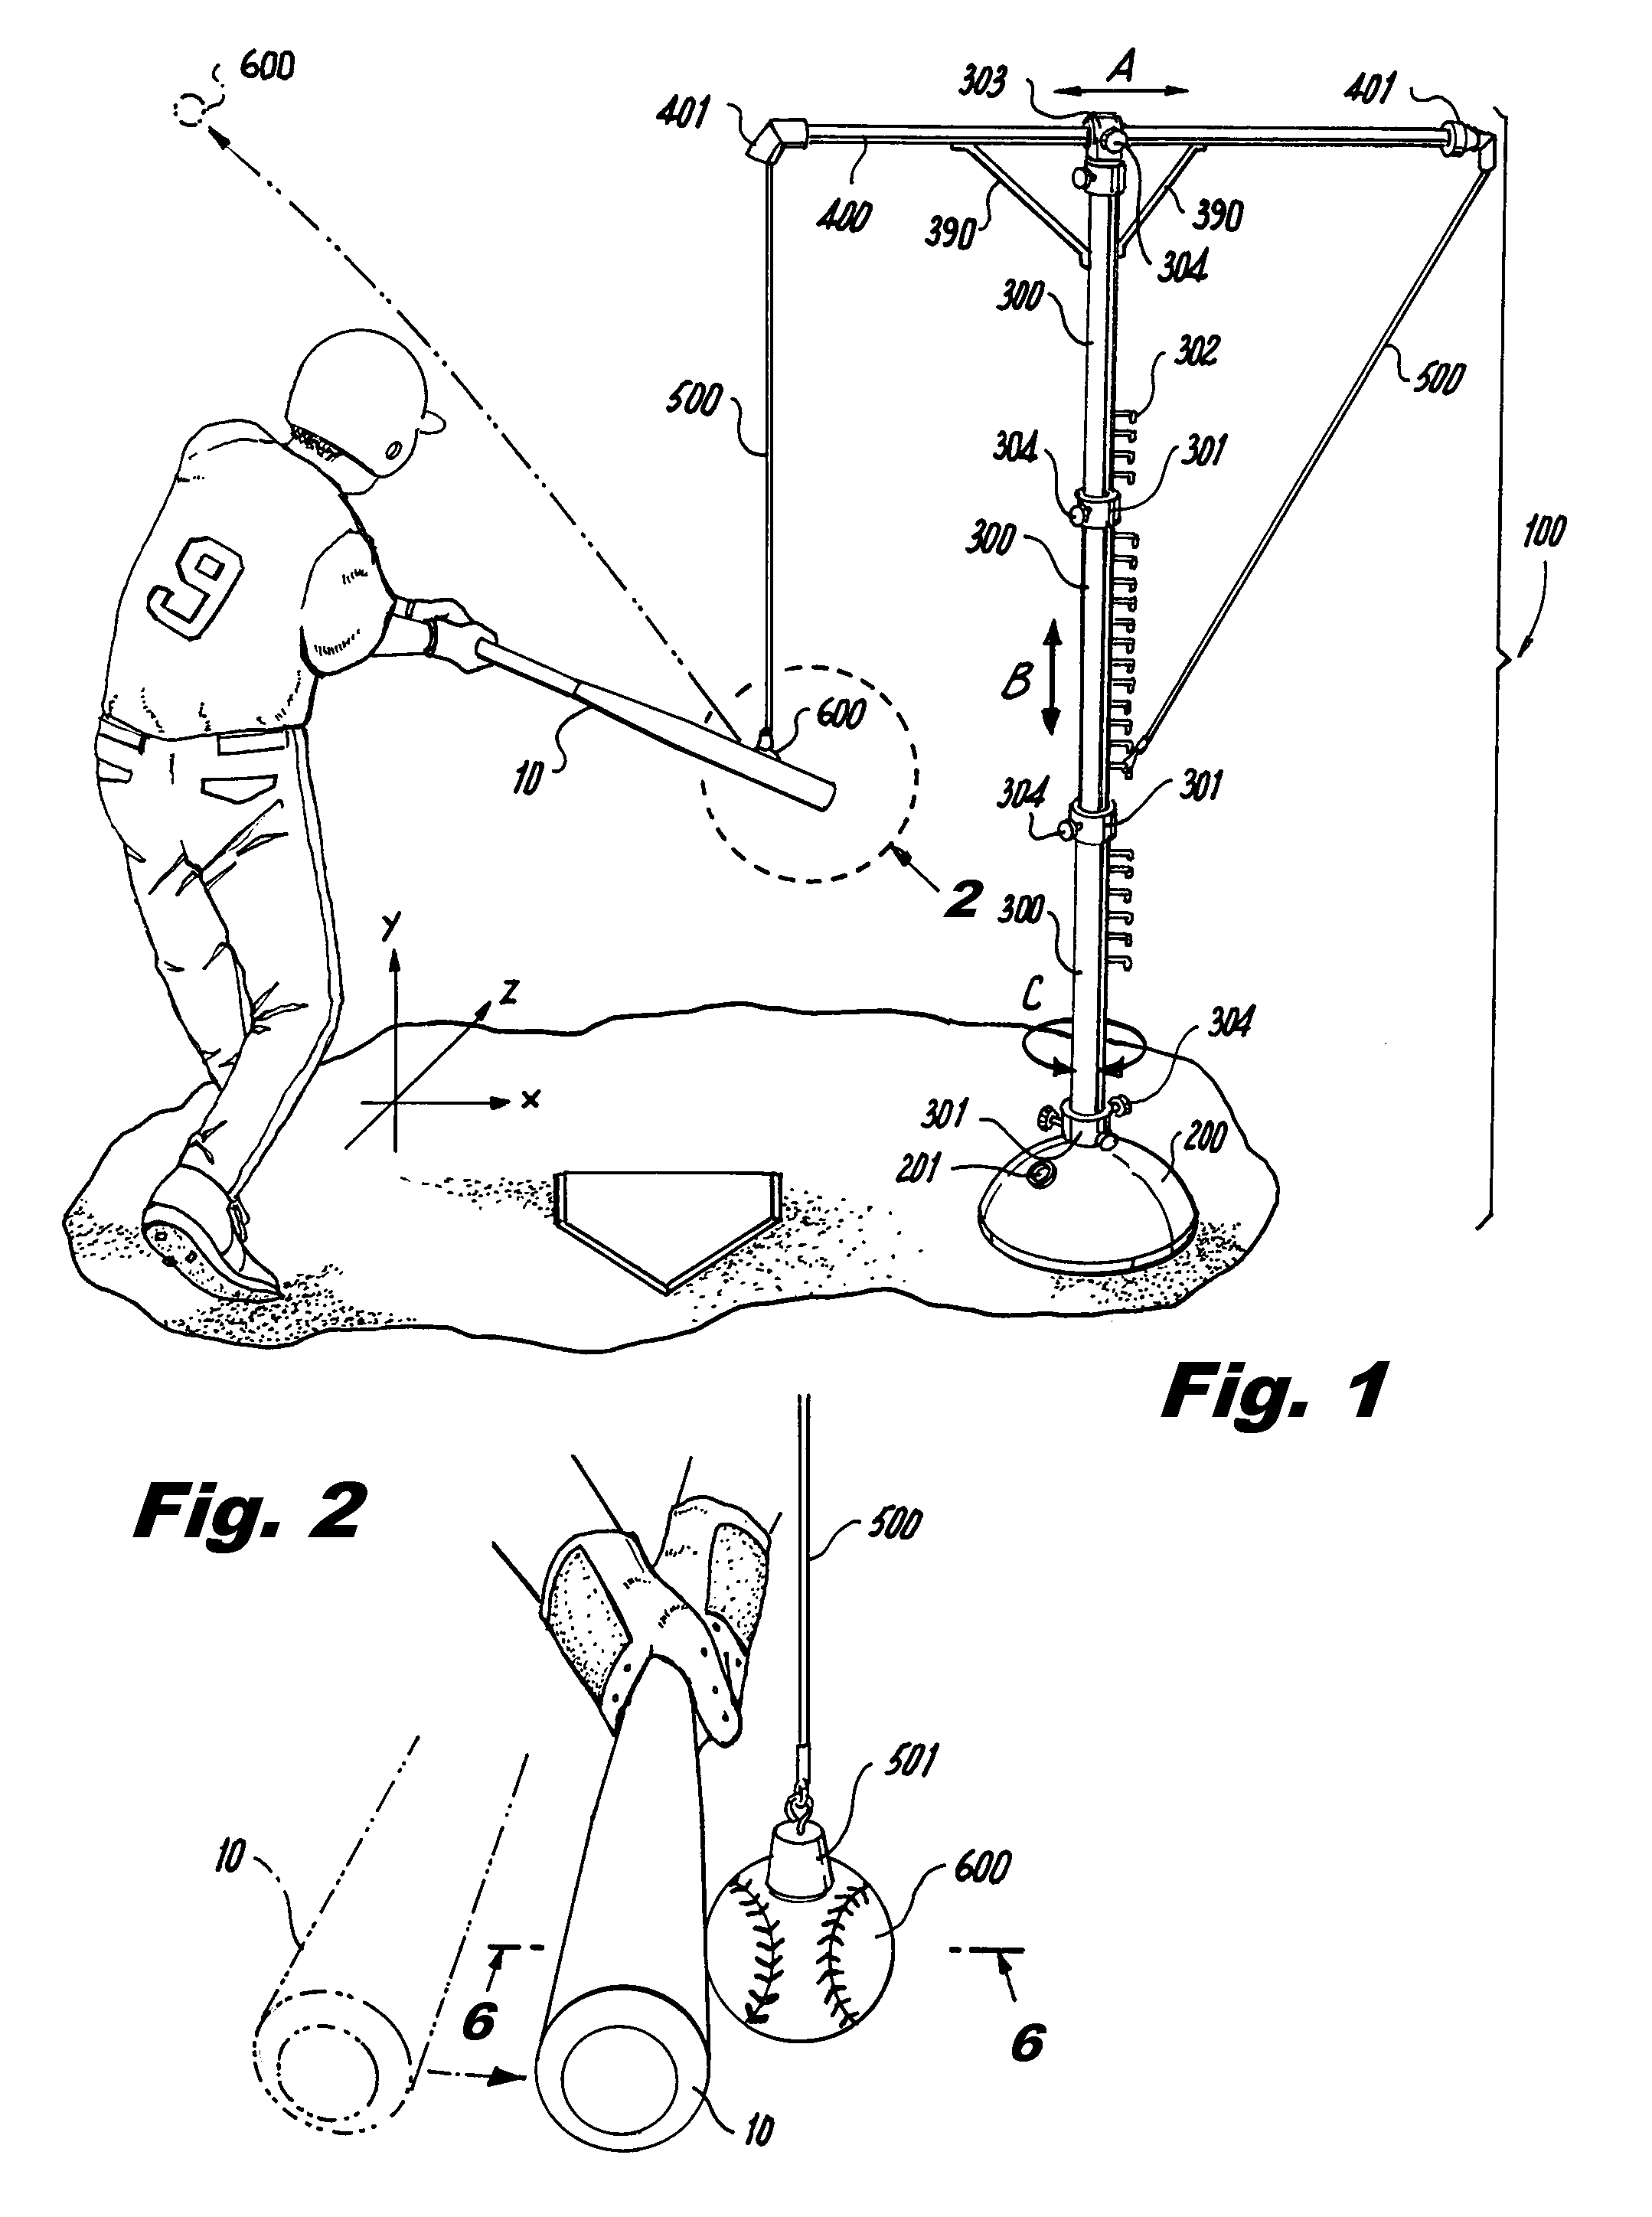 Ball hitting practice device and ball